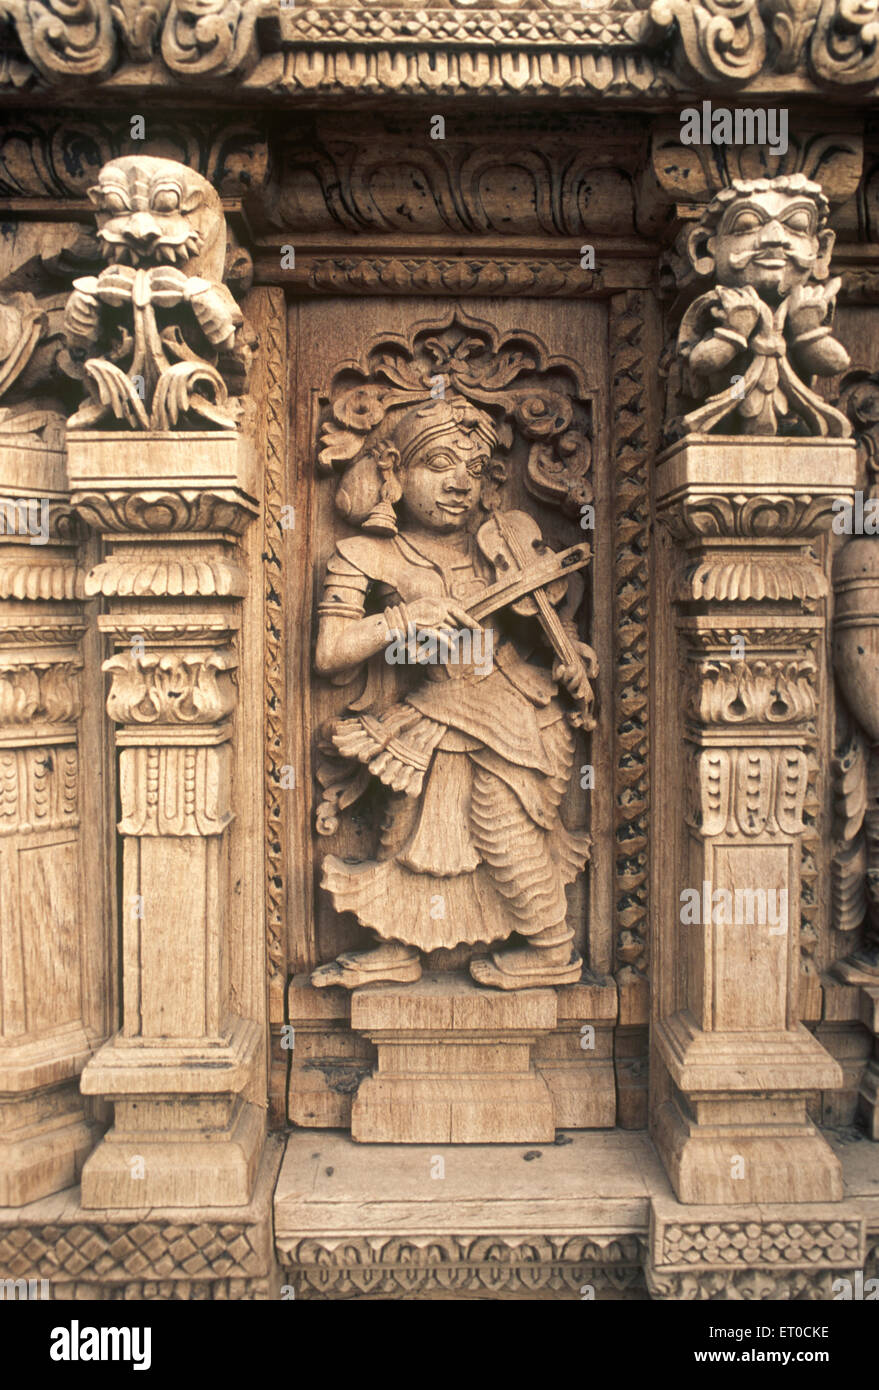 Lady with violin wooden carving statues in old temple chariot at Madurai ;  Tamil Nadu ; India Stock Photo - Alamy